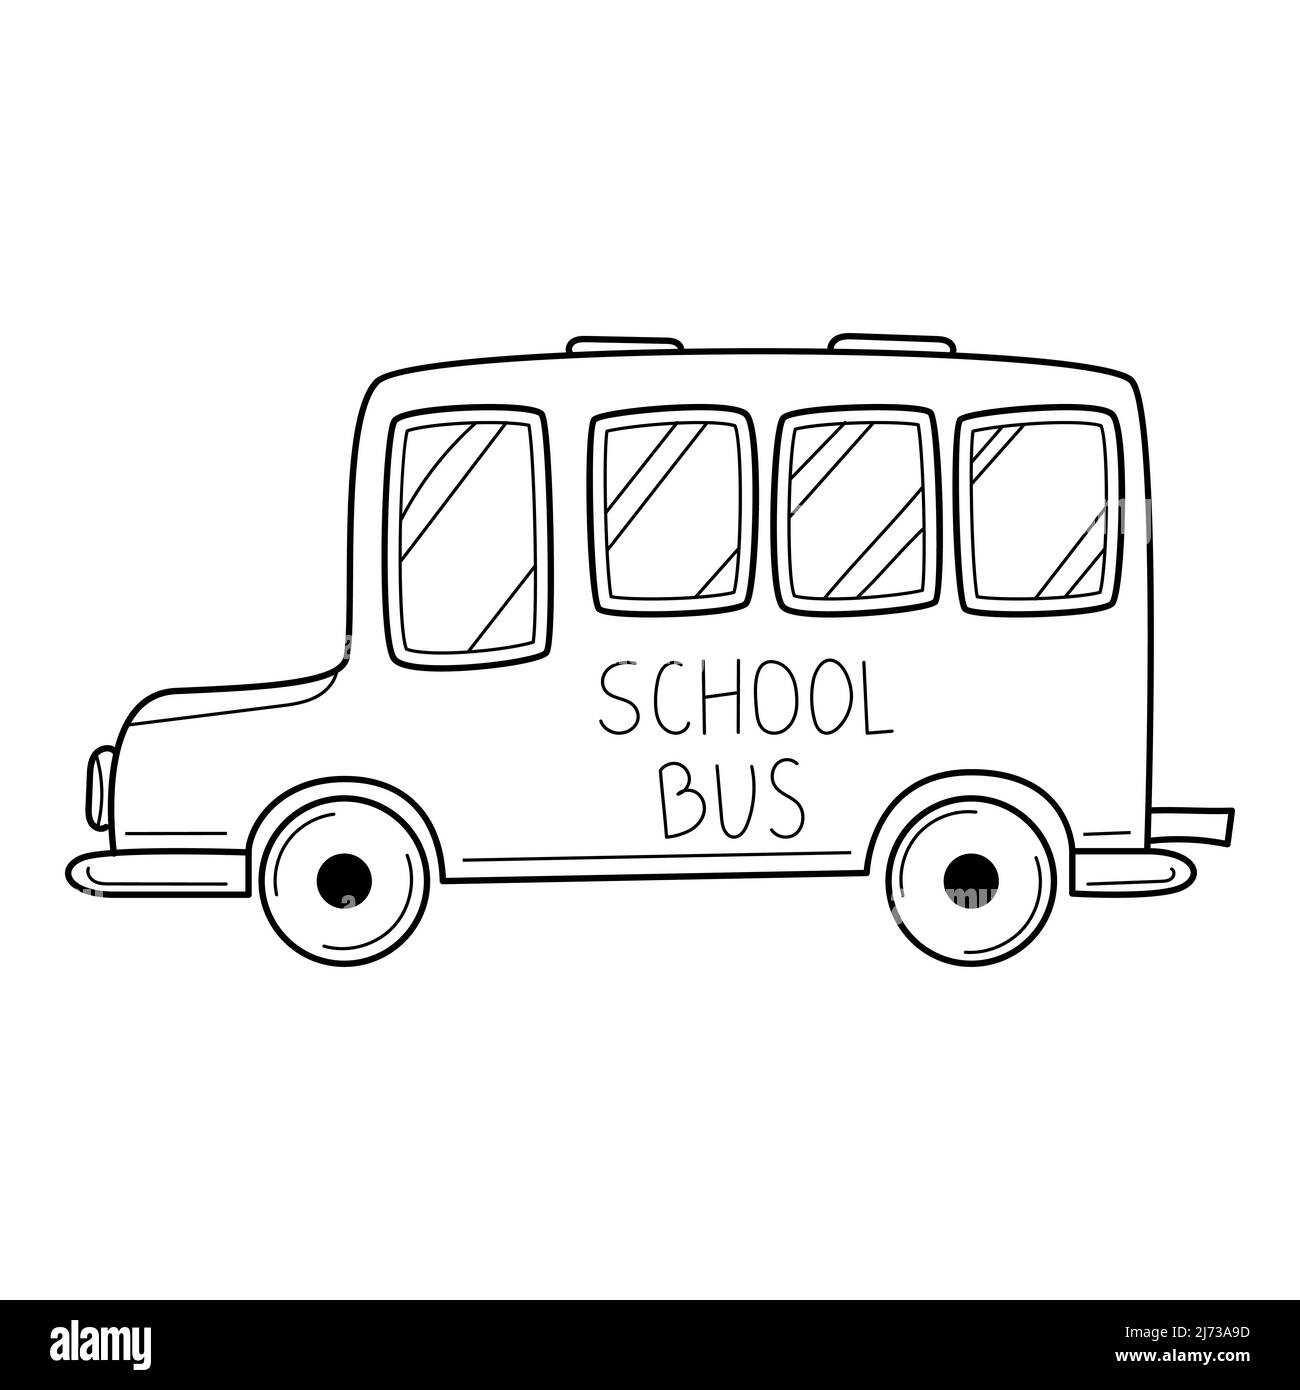 Doodle-style school bus. Hand-drawn black and white vector illustration. Design elements are isolated on a white background. Stock Vector